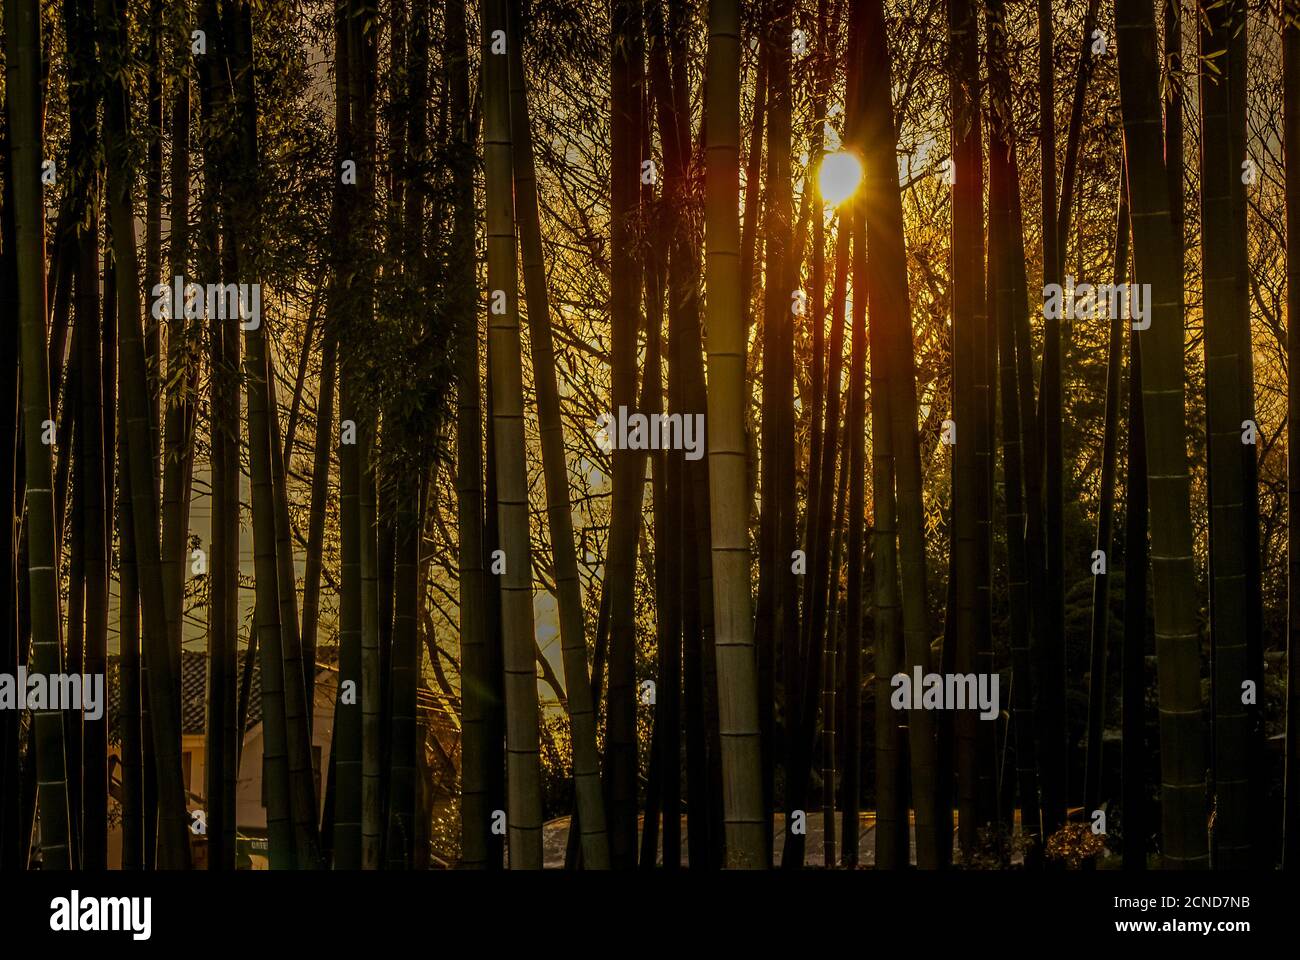 Bamboo forest of the image that was illuminated by the setting sun Stock Photo